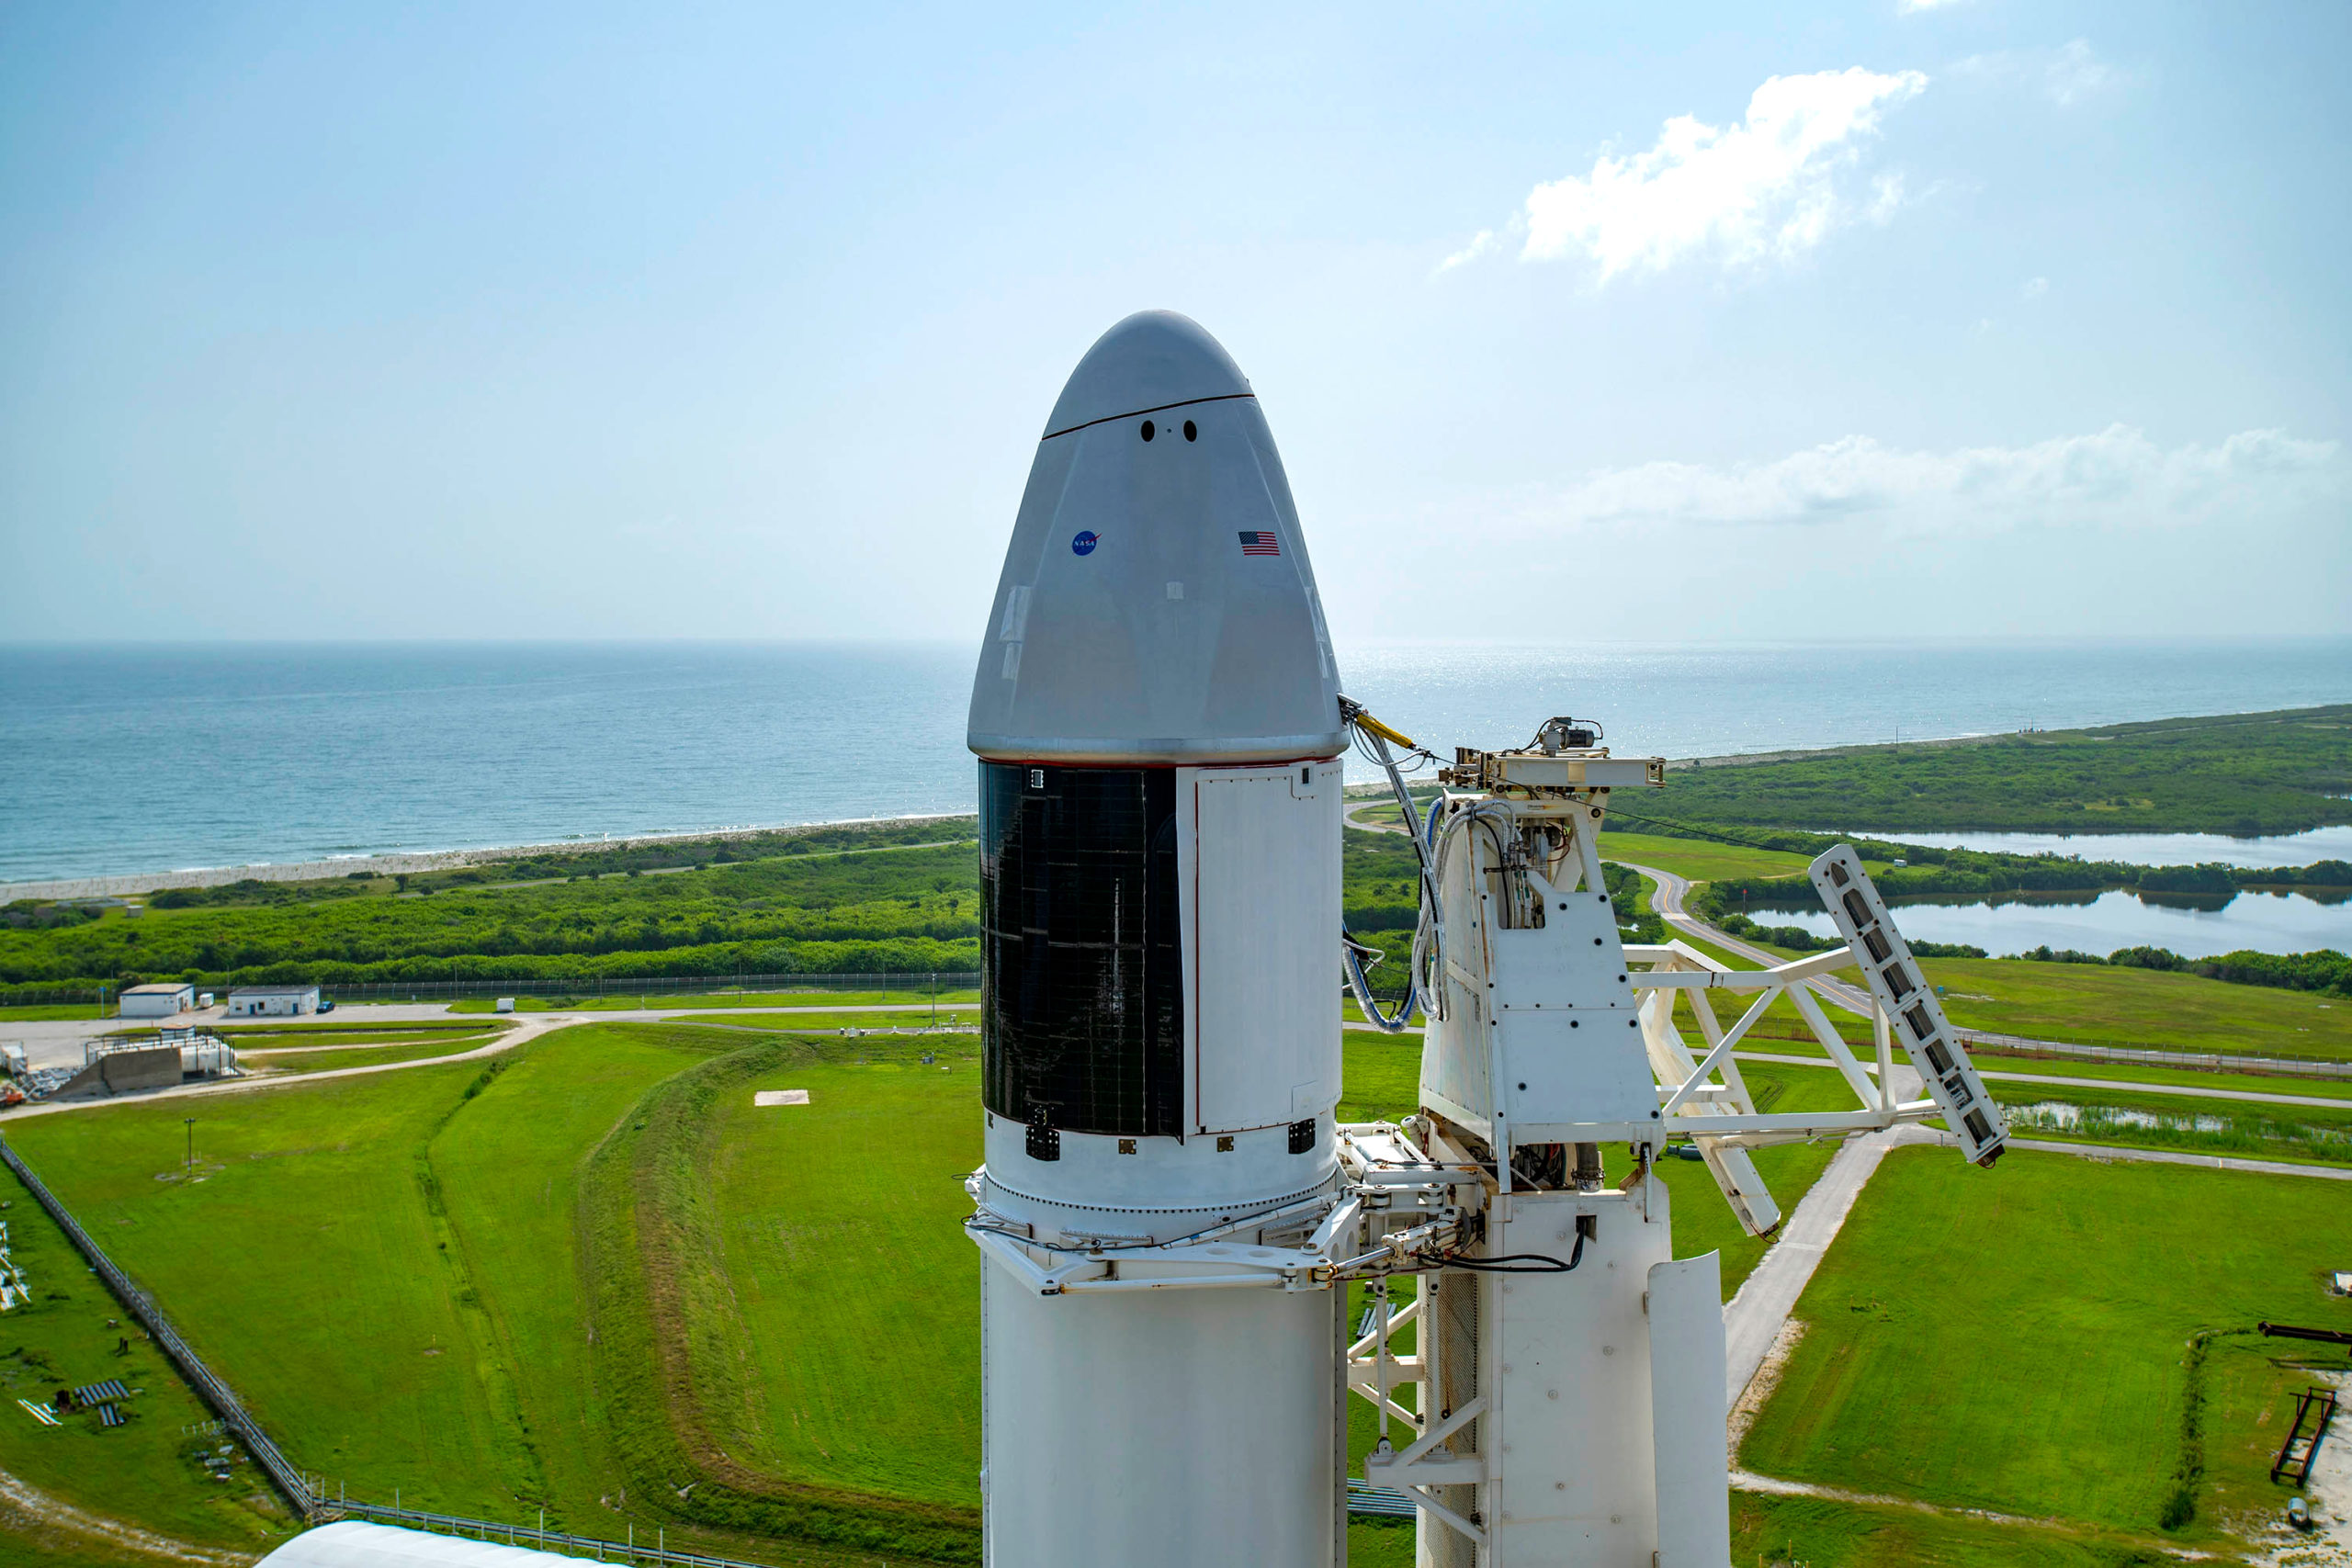 SpaceX ISS Resupply Rocket Launch Set for Thursday from Kennedy Space